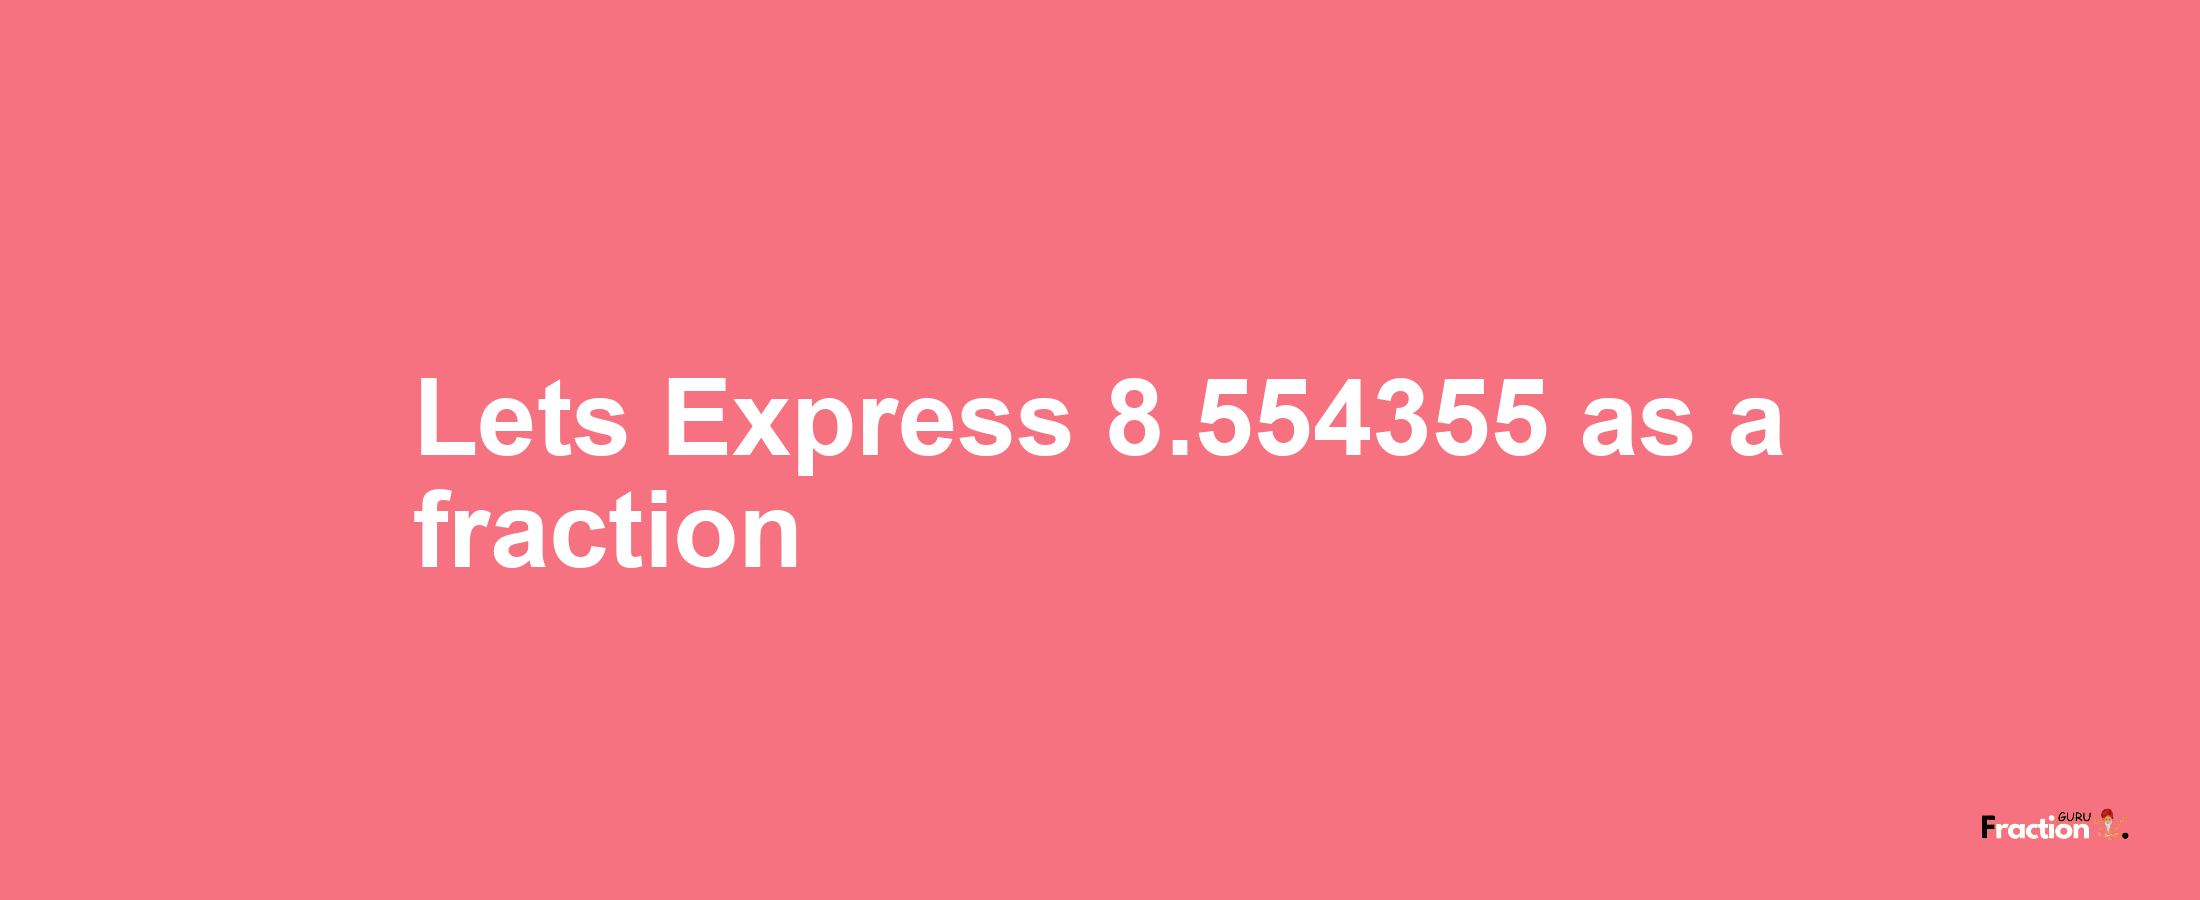 Lets Express 8.554355 as afraction